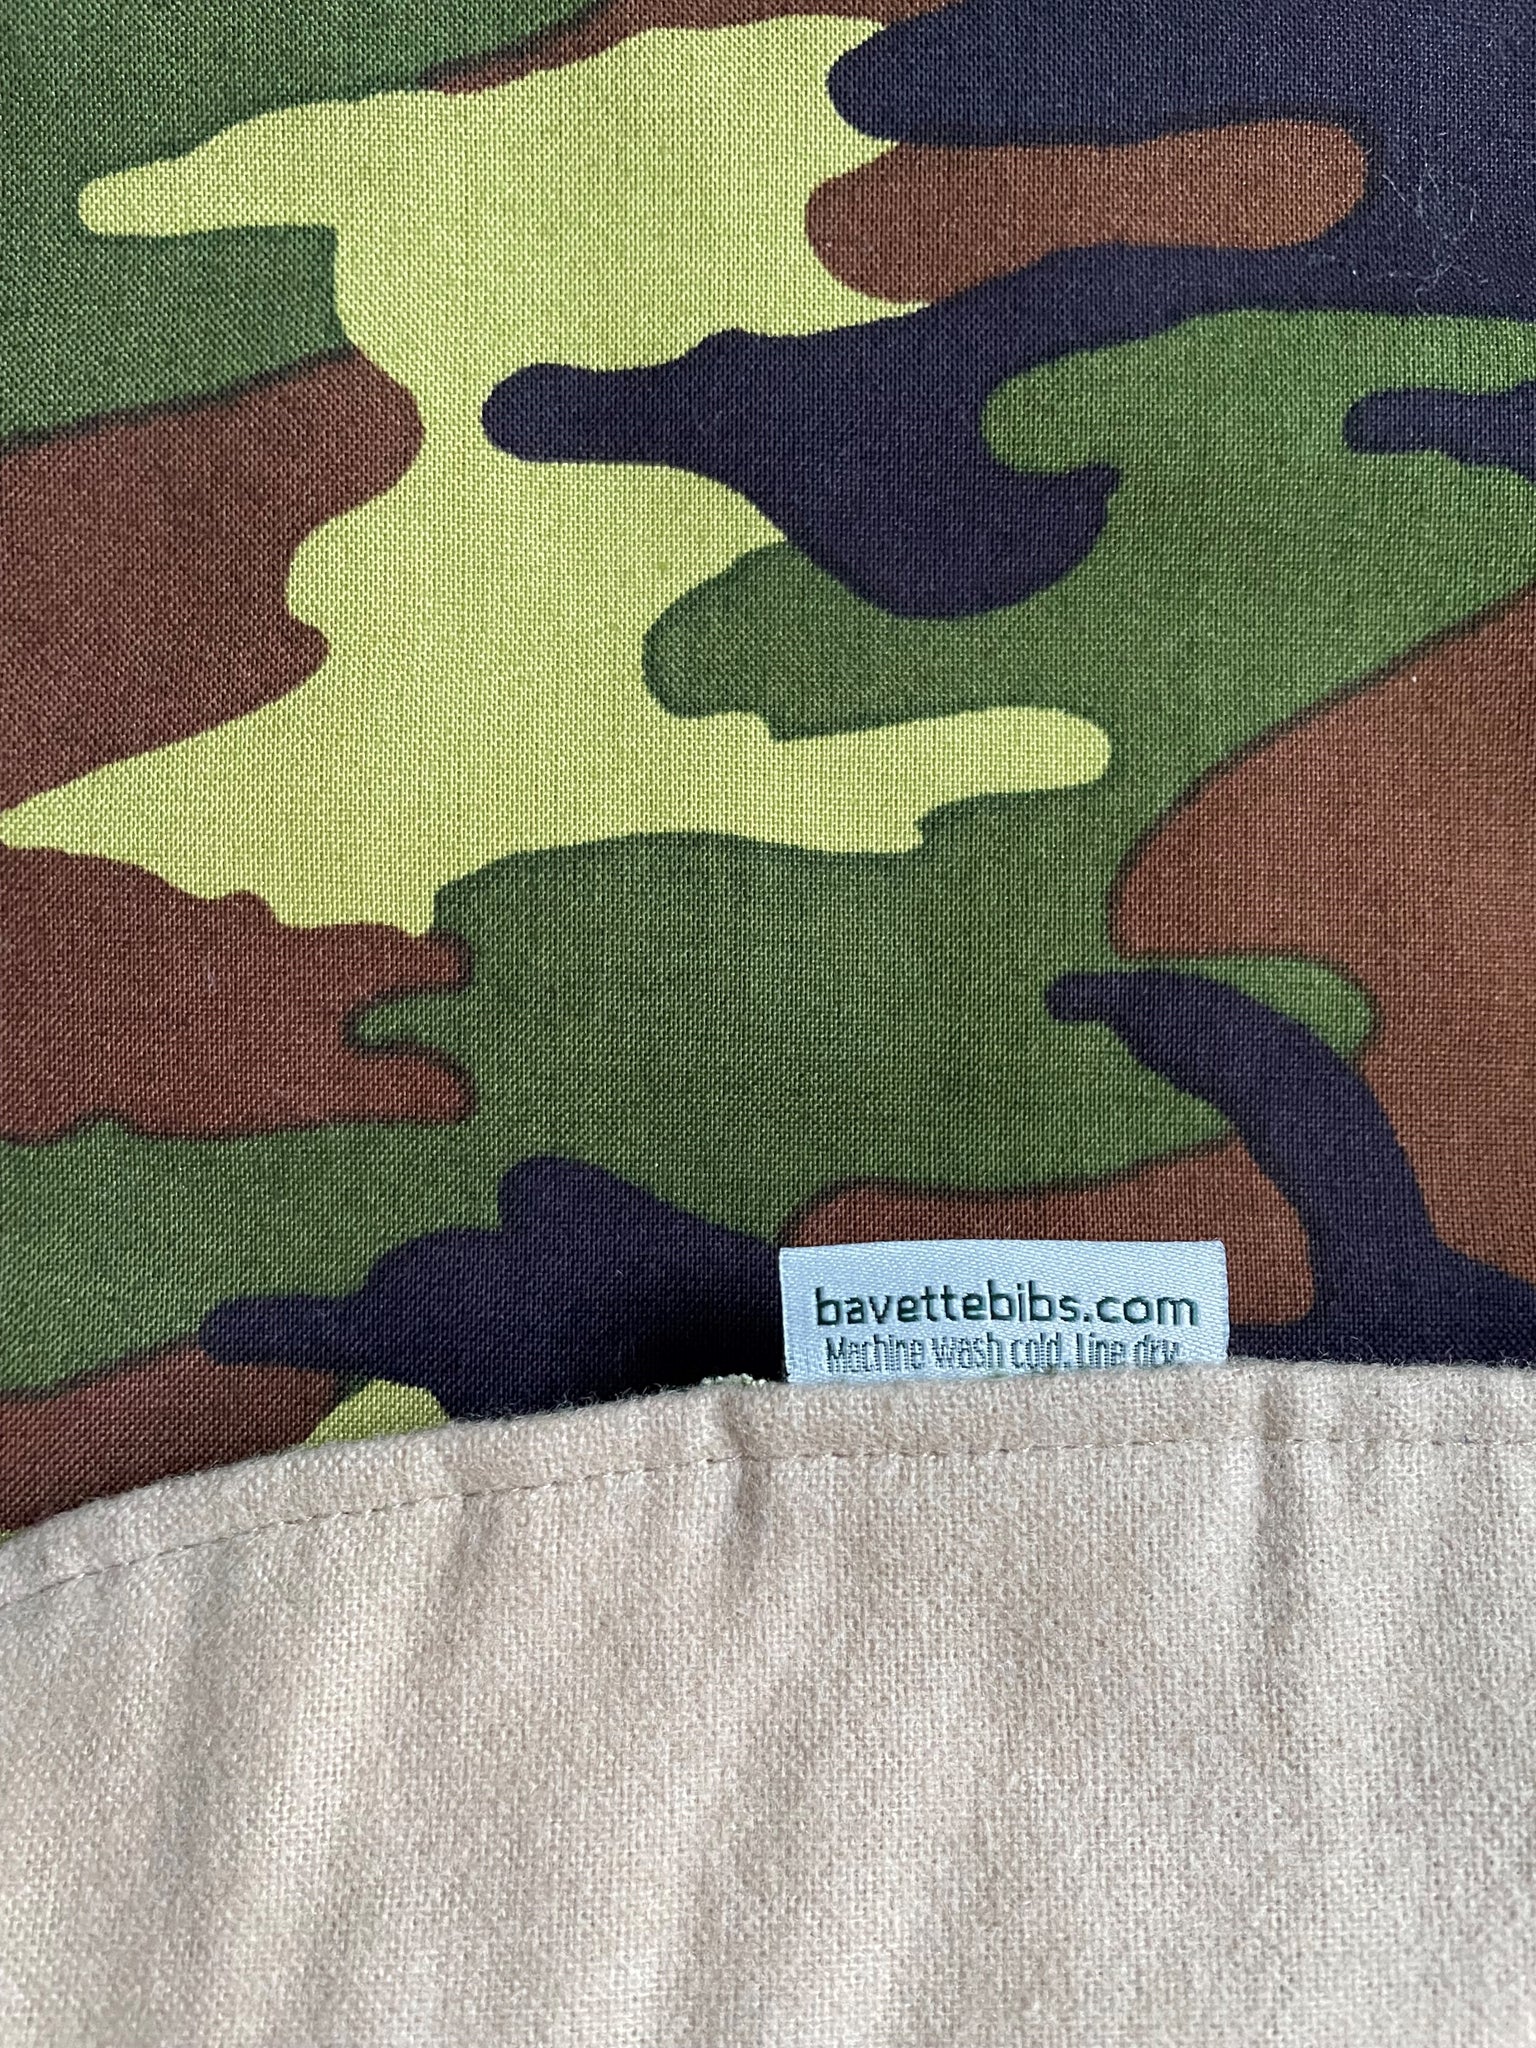 Close up of brown, black, and green camouflage design of BAVETTE adult bib